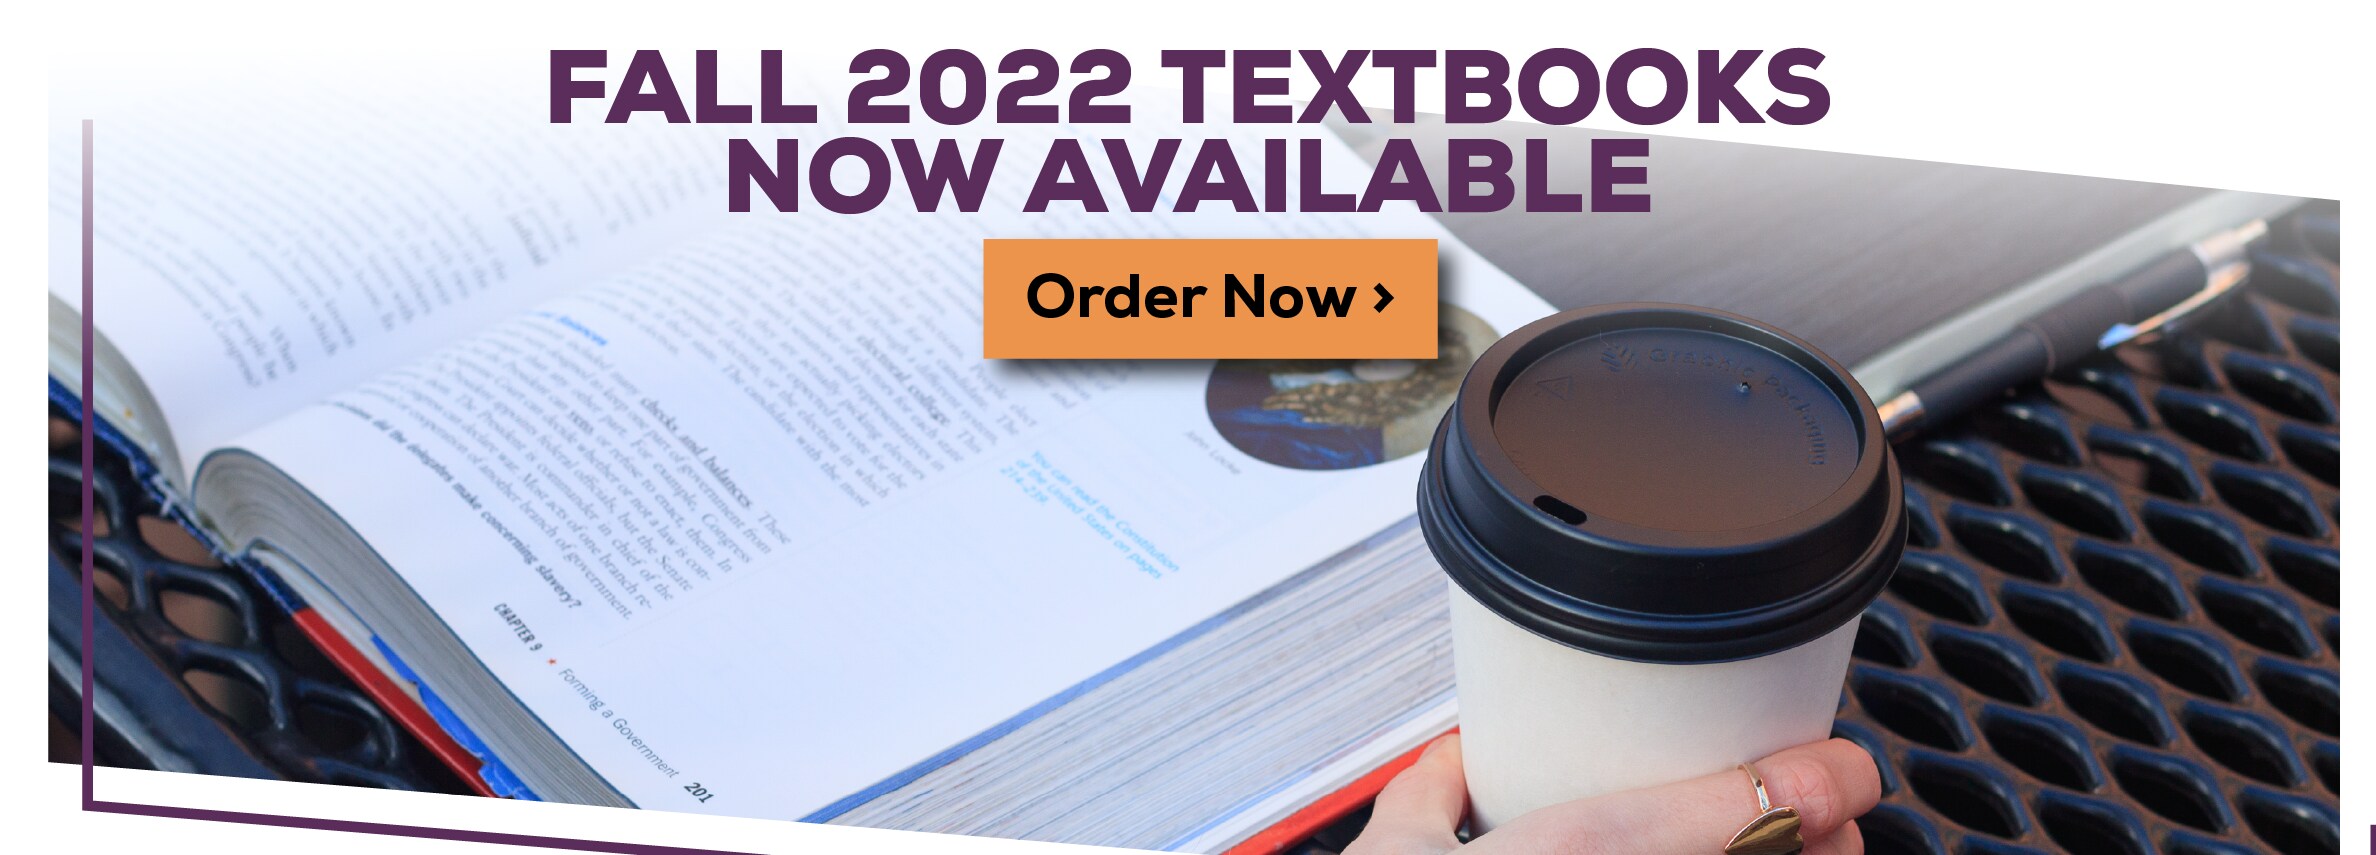 Fall 2022 Textbooks Now Available order now